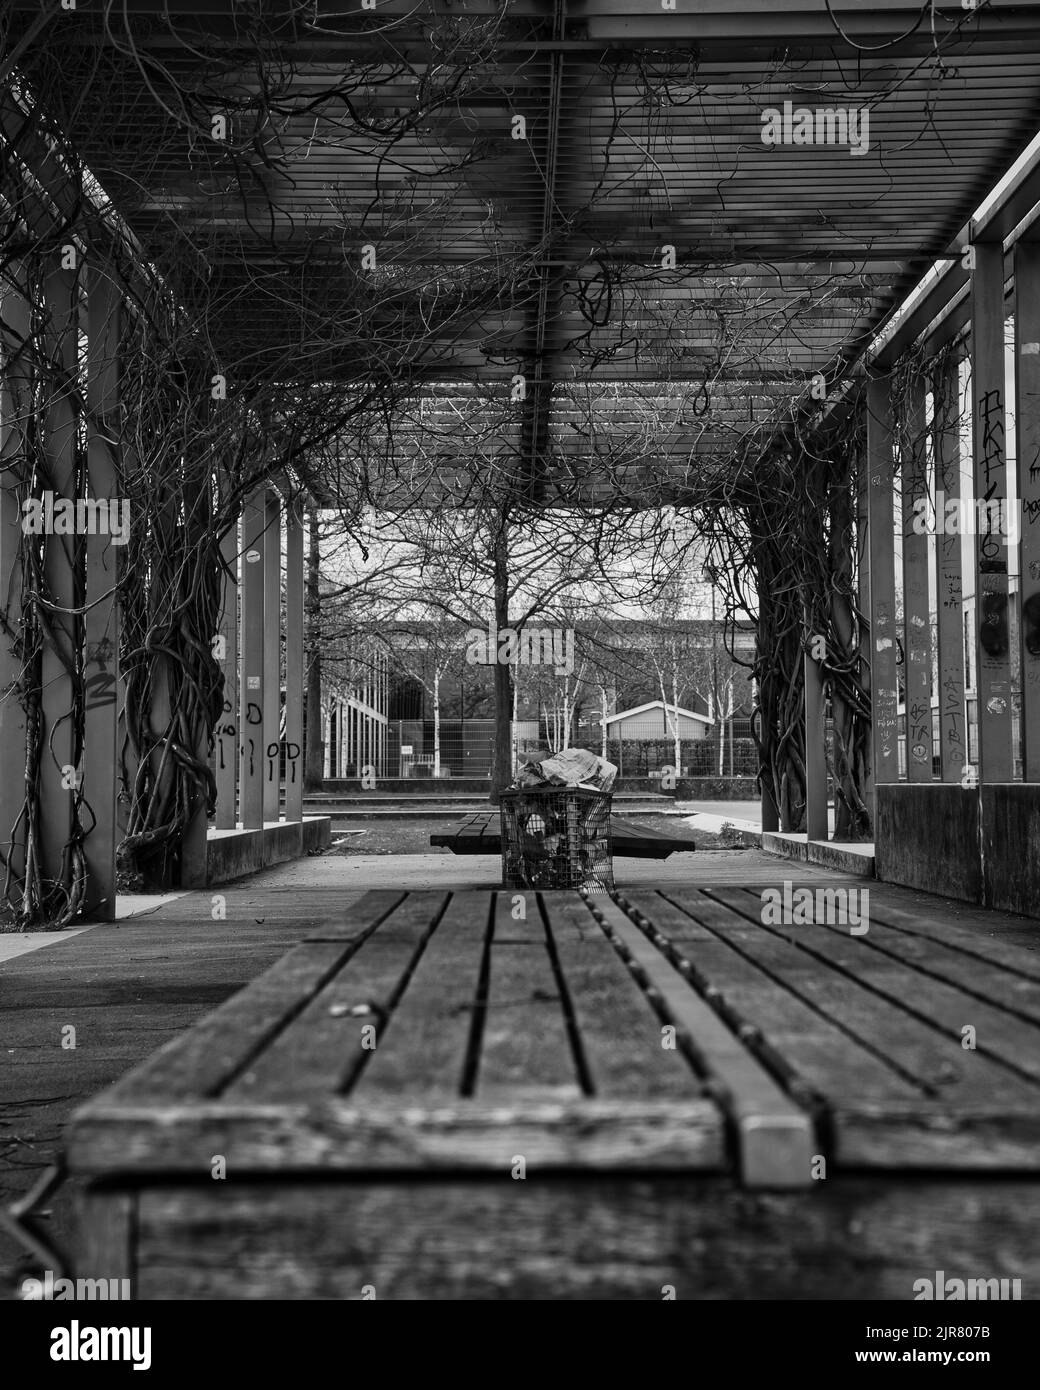 A grayscale shot of benches under a ceiling Stock Photo